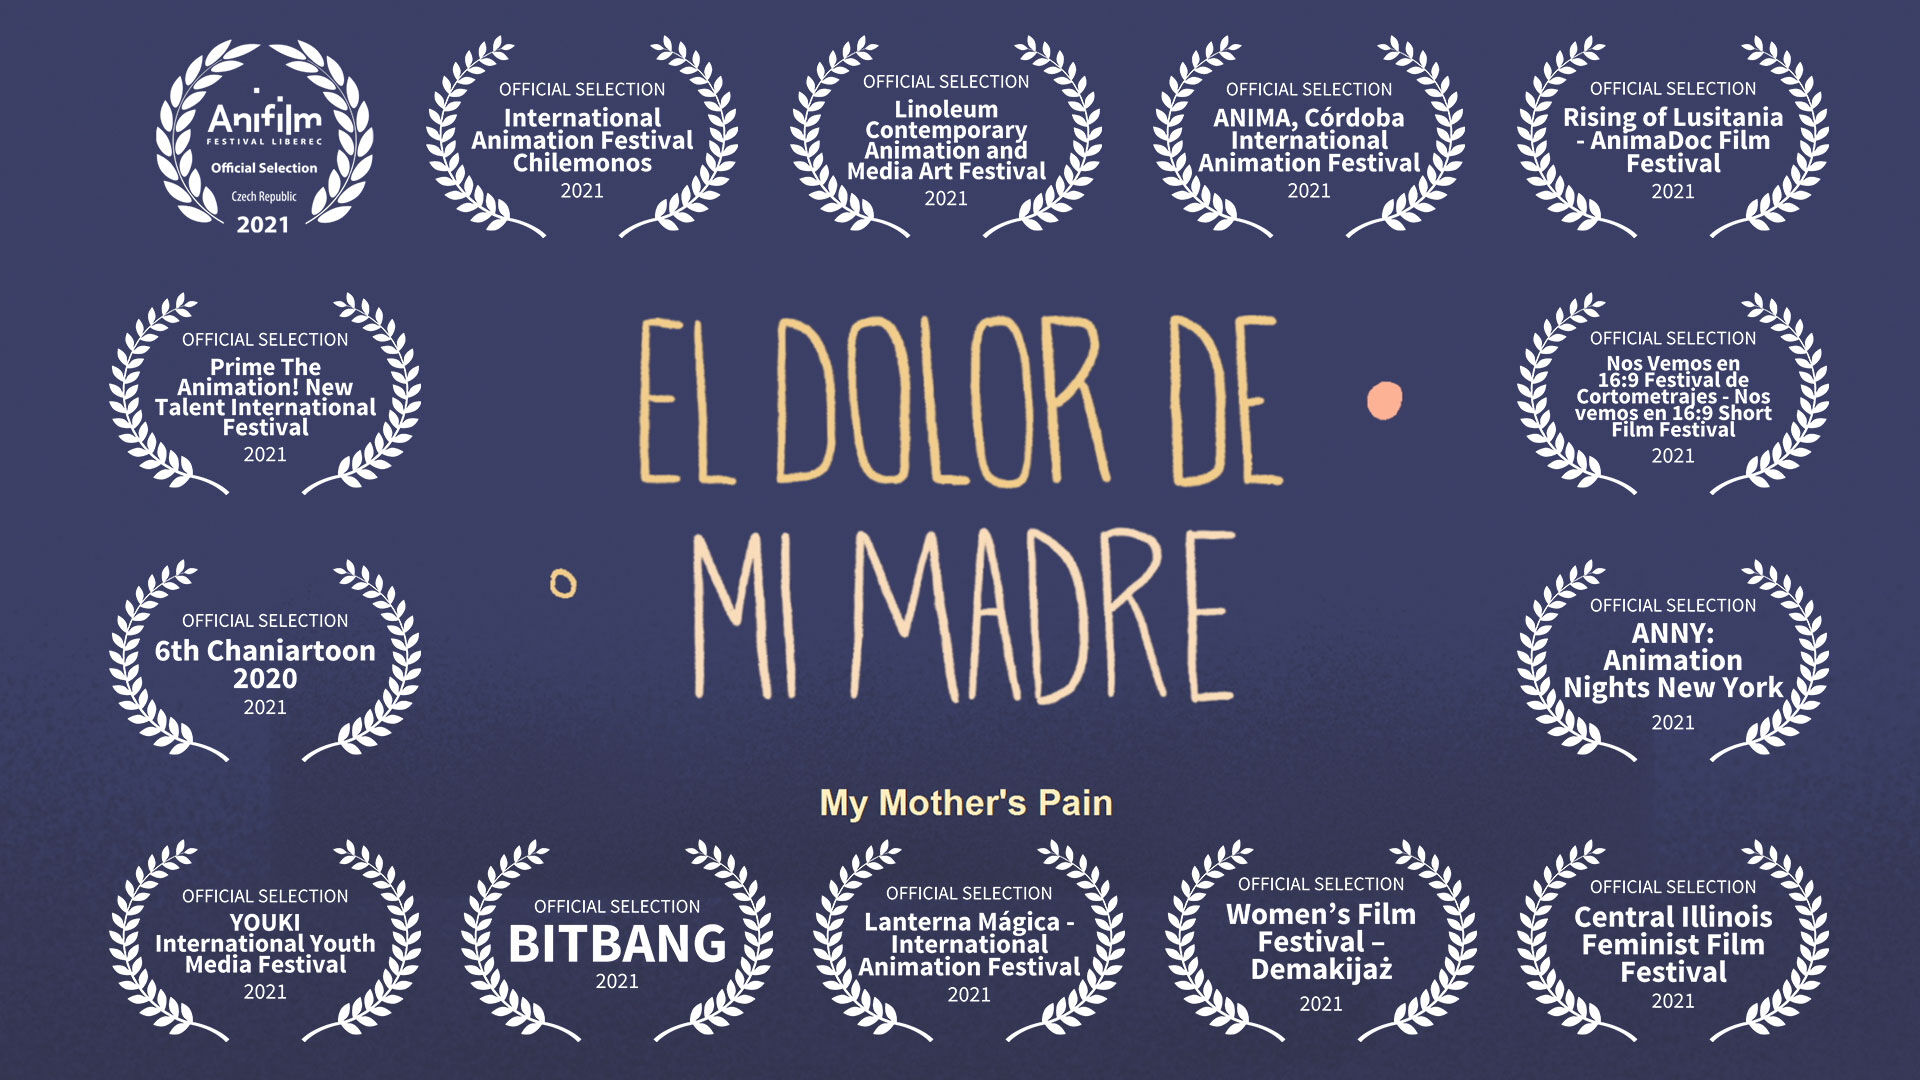 My Mother's Pain Trailer